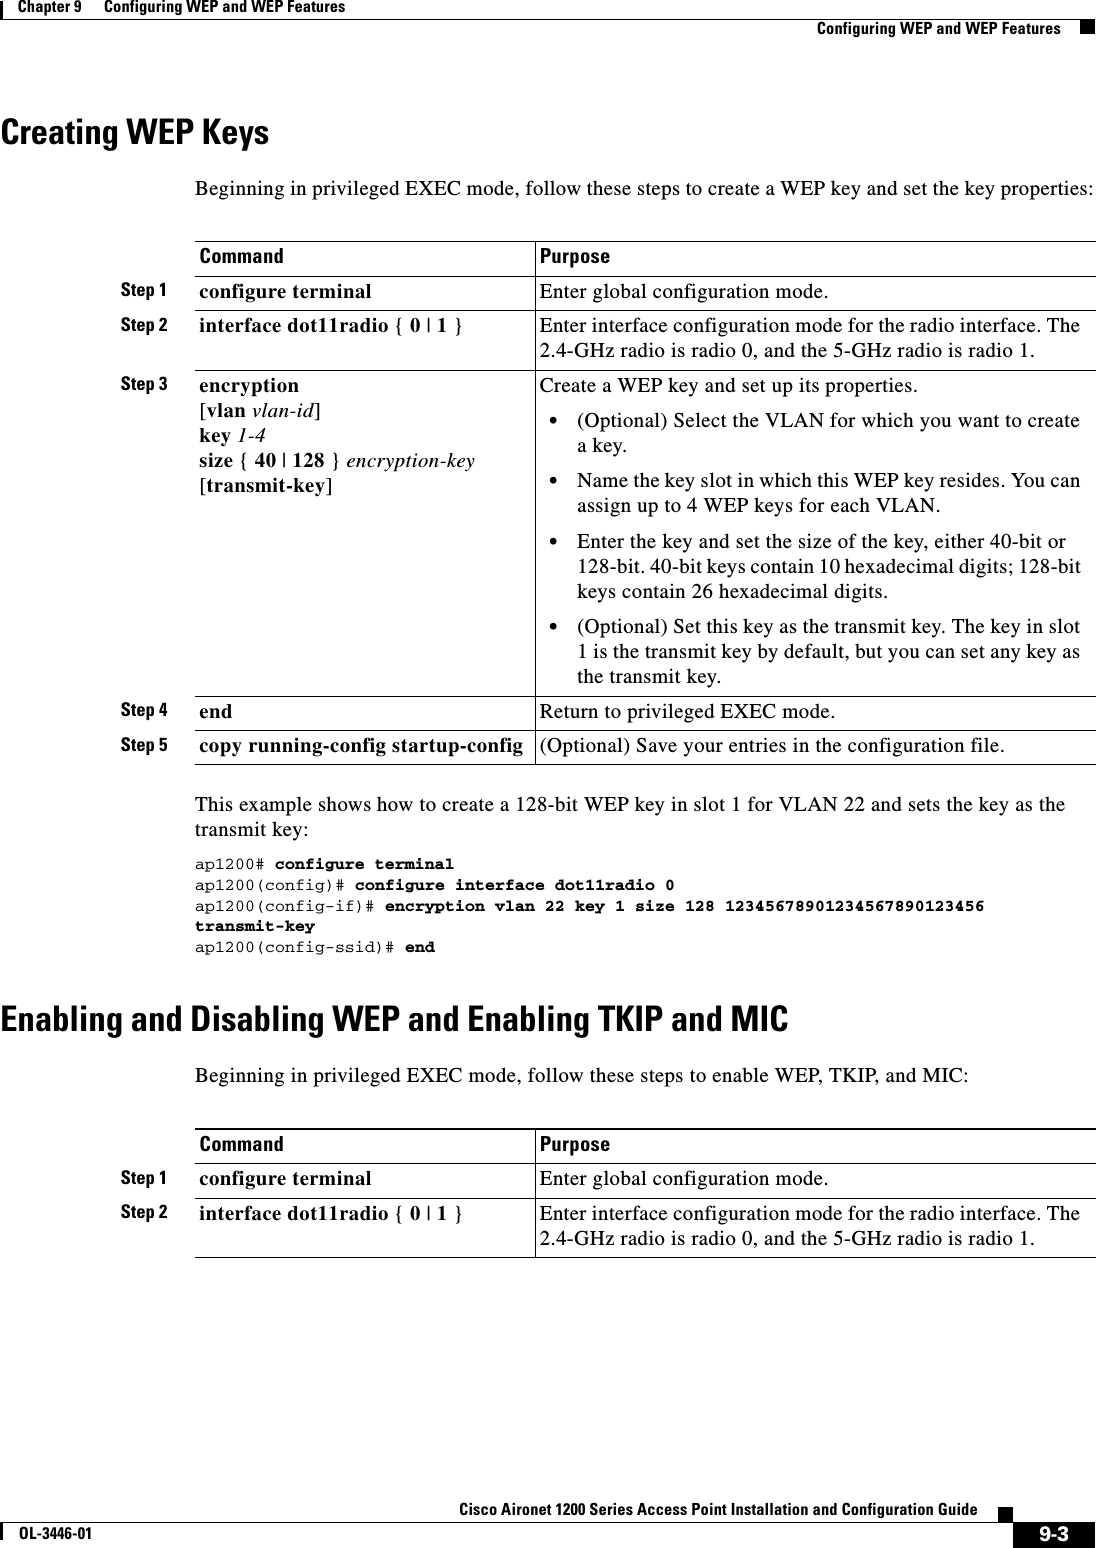 9-3Cisco Aironet 1200 Series Access Point Installation and Configuration GuideOL-3446-01Chapter 9      Configuring WEP and WEP FeaturesConfiguring WEP and WEP FeaturesCreating WEP KeysBeginning in privileged EXEC mode, follow these steps to create a WEP key and set the key properties:This example shows how to create a 128-bit WEP key in slot 1 for VLAN 22 and sets the key as the transmit key:ap1200# configure terminalap1200(config)# configure interface dot11radio 0ap1200(config-if)# encryption vlan 22 key 1 size 128 12345678901234567890123456 transmit-keyap1200(config-ssid)# endEnabling and Disabling WEP and Enabling TKIP and MICBeginning in privileged EXEC mode, follow these steps to enable WEP, TKIP, and MIC:Command PurposeStep 1 configure terminal Enter global configuration mode.Step 2 interface dot11radio { 0 | 1 } Enter interface configuration mode for the radio interface. The 2.4-GHz radio is radio 0, and the 5-GHz radio is radio 1.Step 3 encryption[vlan vlan-id]key 1-4size {40 | 128 } encryption-key[transmit-key]Create a WEP key and set up its properties.•(Optional) Select the VLAN for which you want to create a key.•Name the key slot in which this WEP key resides. You can assign up to 4 WEP keys for each VLAN.•Enter the key and set the size of the key, either 40-bit or 128-bit. 40-bit keys contain 10 hexadecimal digits; 128-bit keys contain 26 hexadecimal digits. •(Optional) Set this key as the transmit key. The key in slot 1 is the transmit key by default, but you can set any key as the transmit key.Step 4 end Return to privileged EXEC mode.Step 5 copy running-config startup-config (Optional) Save your entries in the configuration file.Command PurposeStep 1 configure terminal Enter global configuration mode.Step 2 interface dot11radio { 0 | 1 } Enter interface configuration mode for the radio interface. The 2.4-GHz radio is radio 0, and the 5-GHz radio is radio 1.